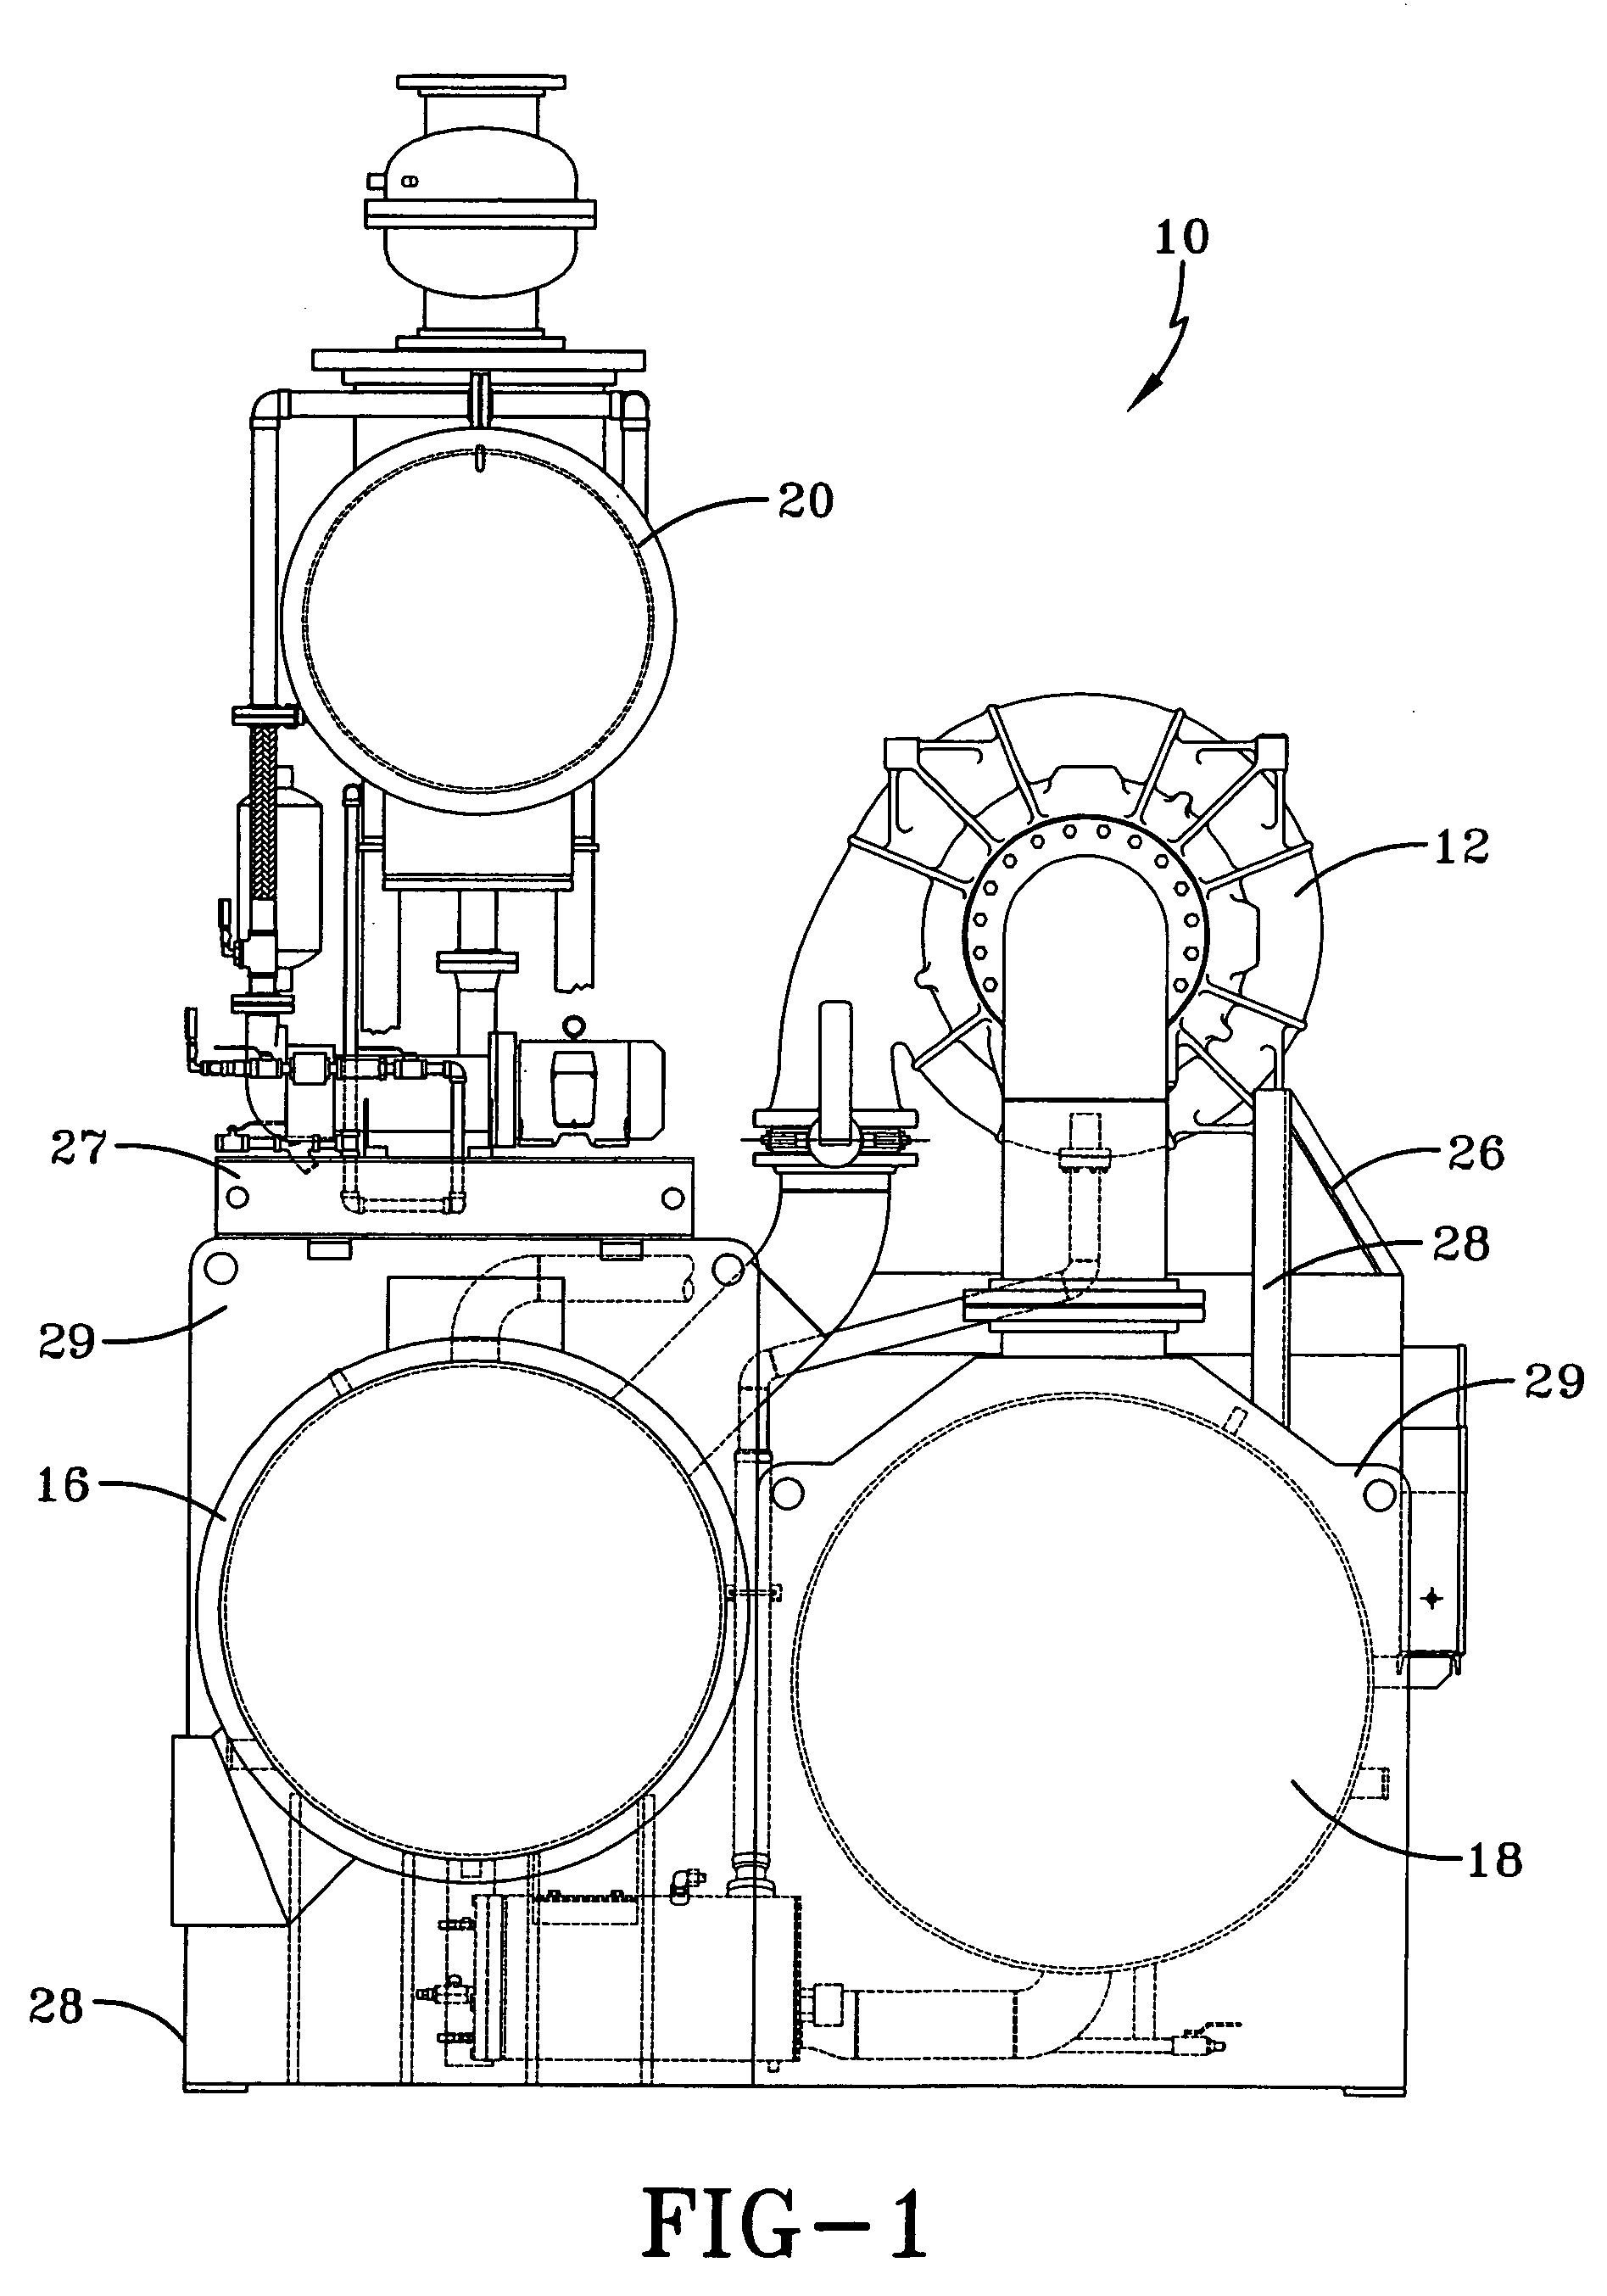 Integrated adaptive capacity control for a steam turbine powered chiller unit